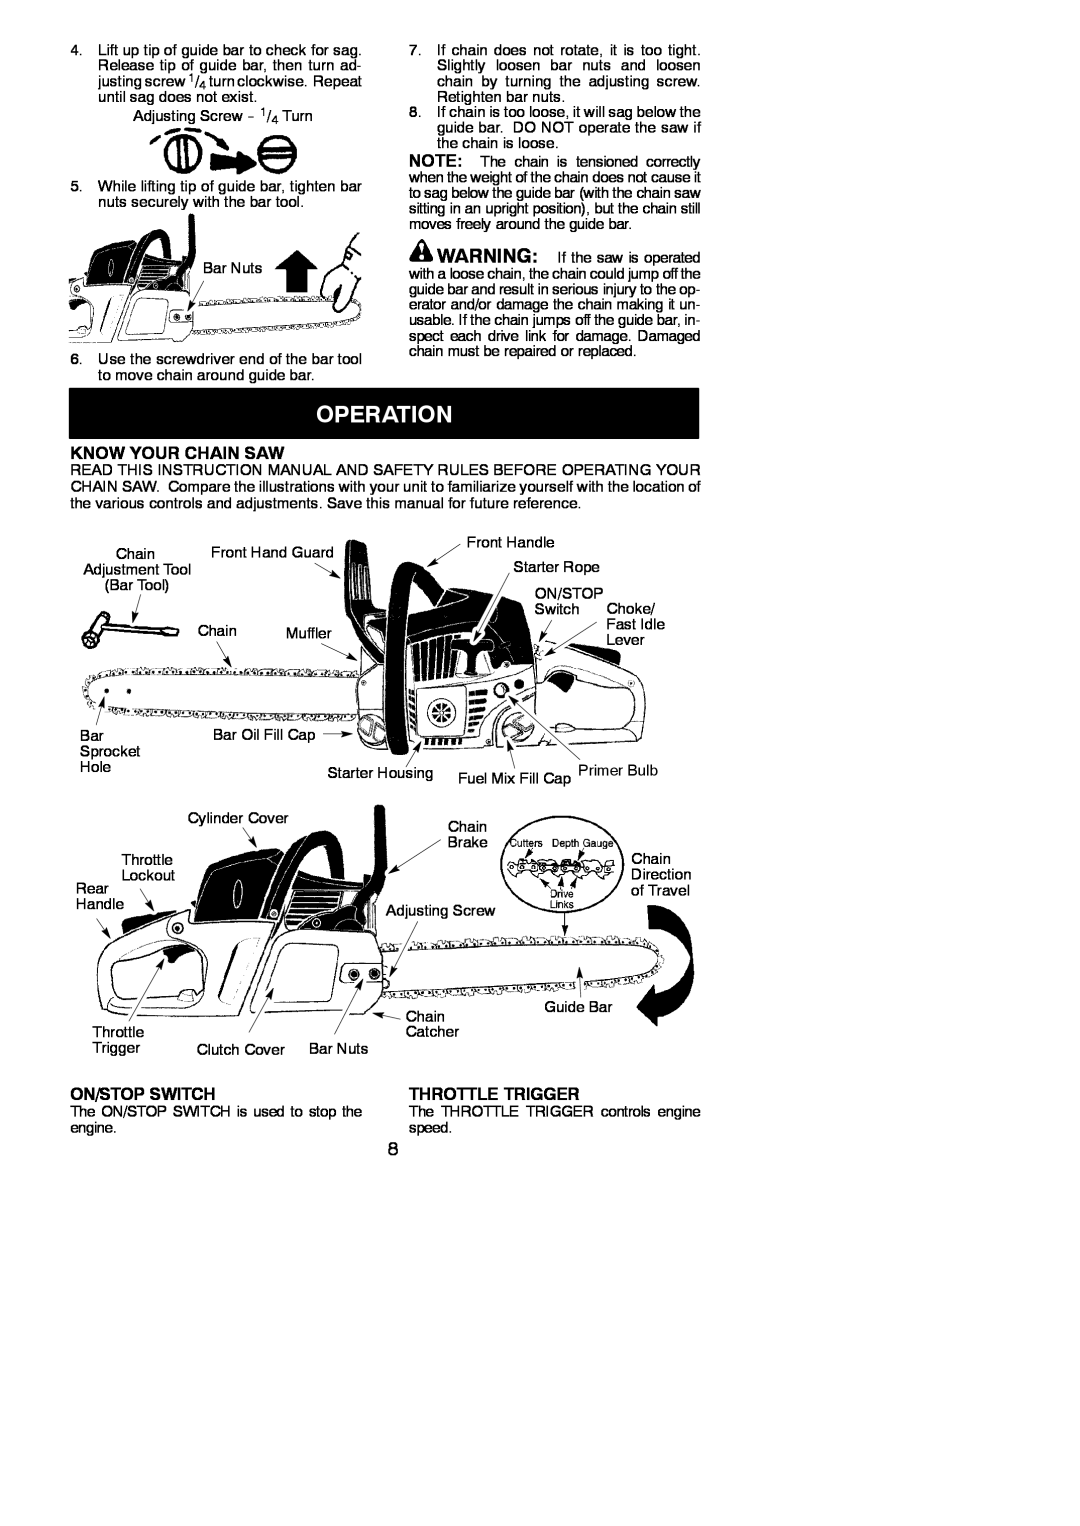 McCulloch 115377027, 966625301, MC4218AV instruction manual Operation, Know Your Chain Saw, On/Stop Switch, Throttle Trigger 